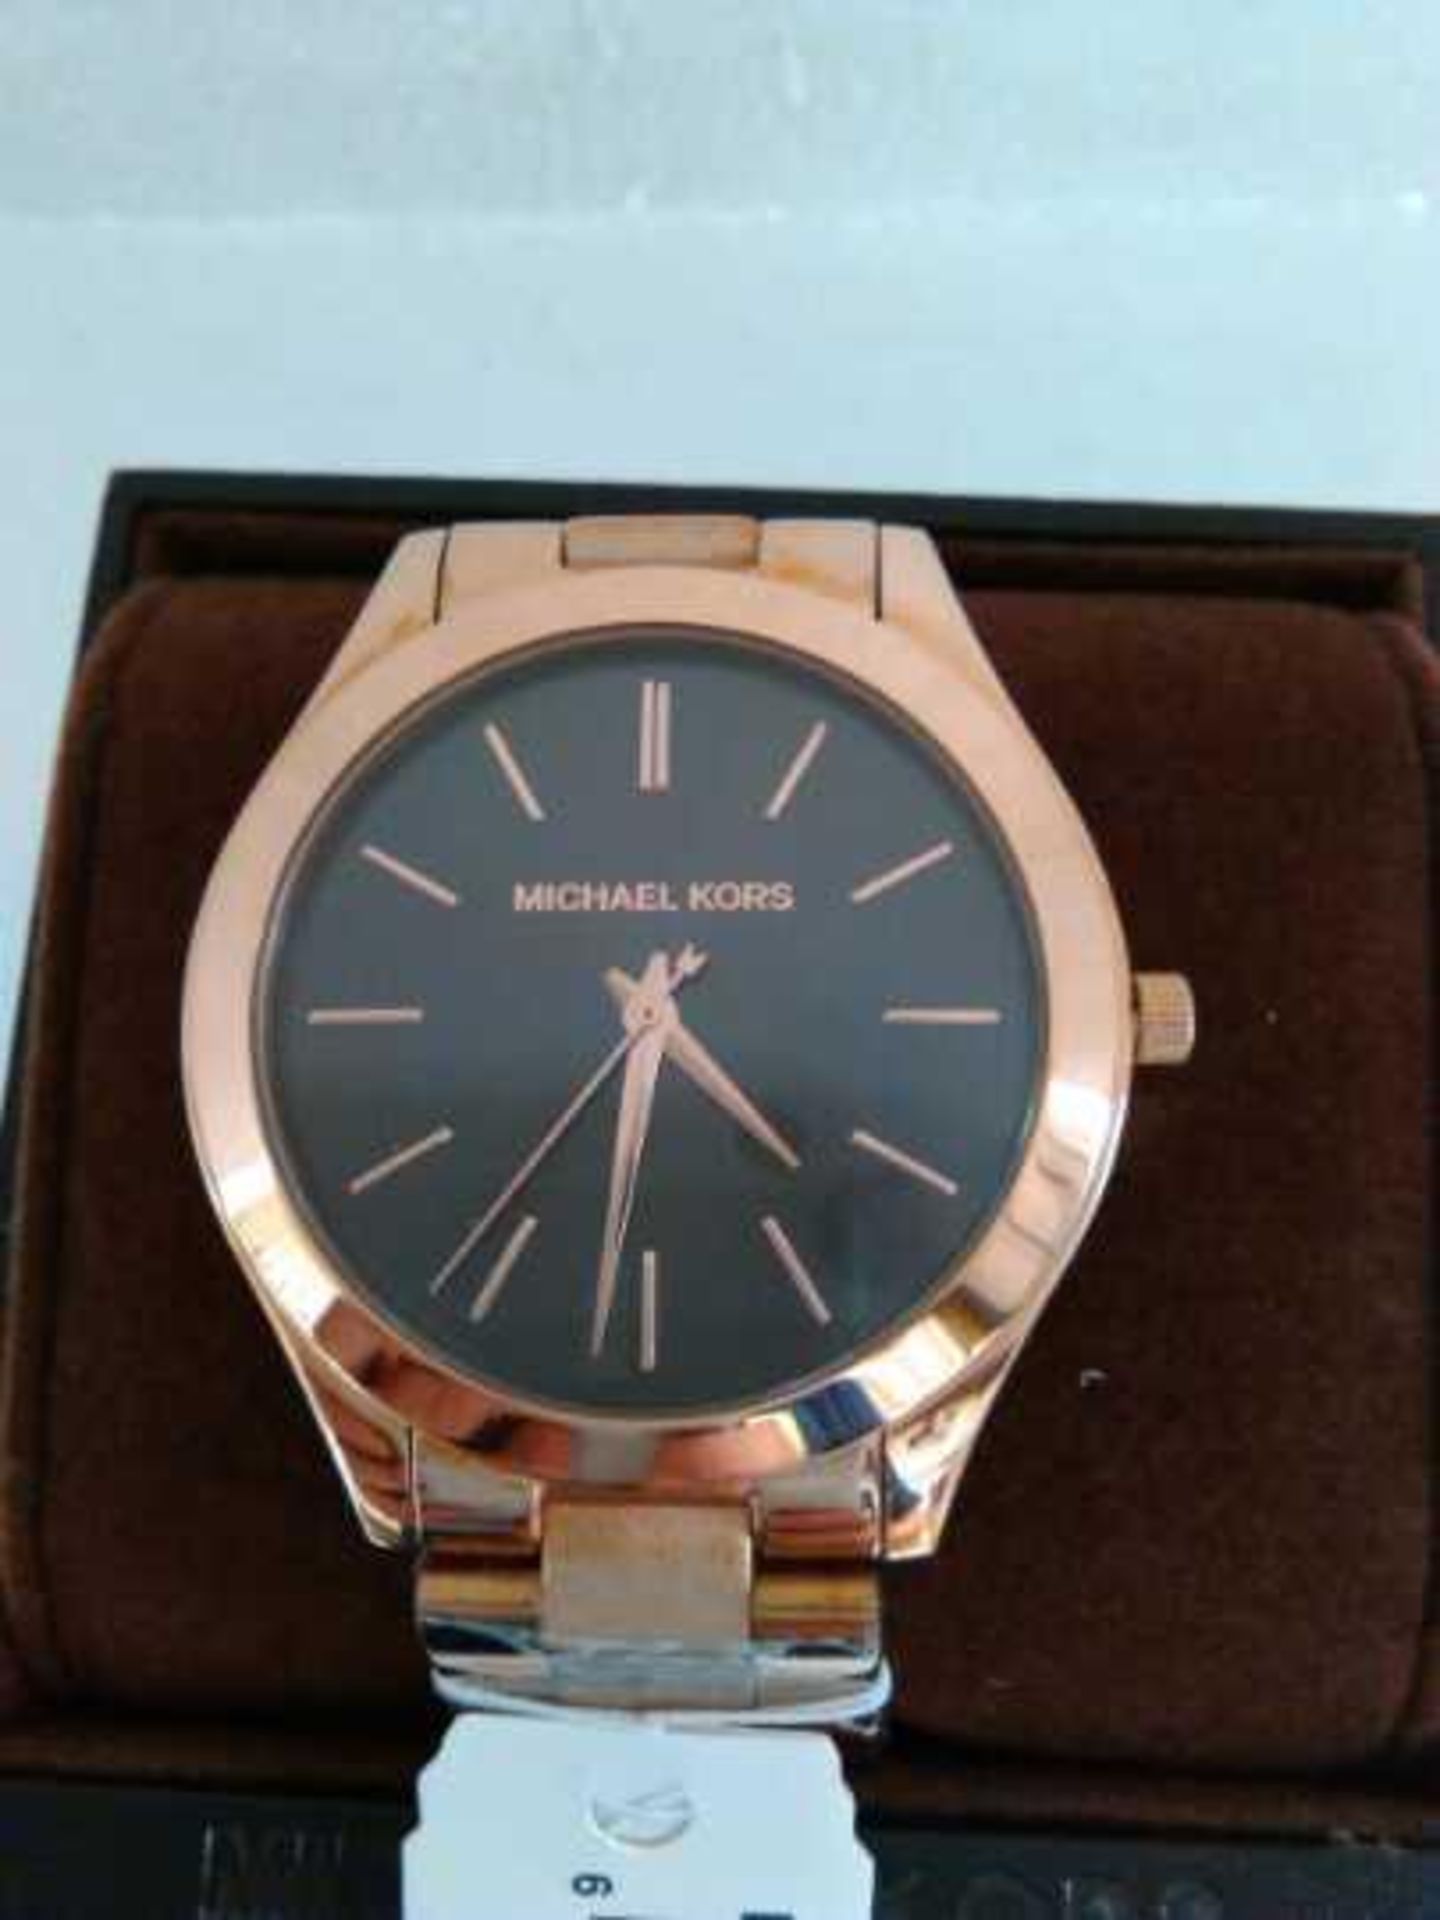 NO VAT, Micheal kors MK3181watch, new and ticking in presentation box